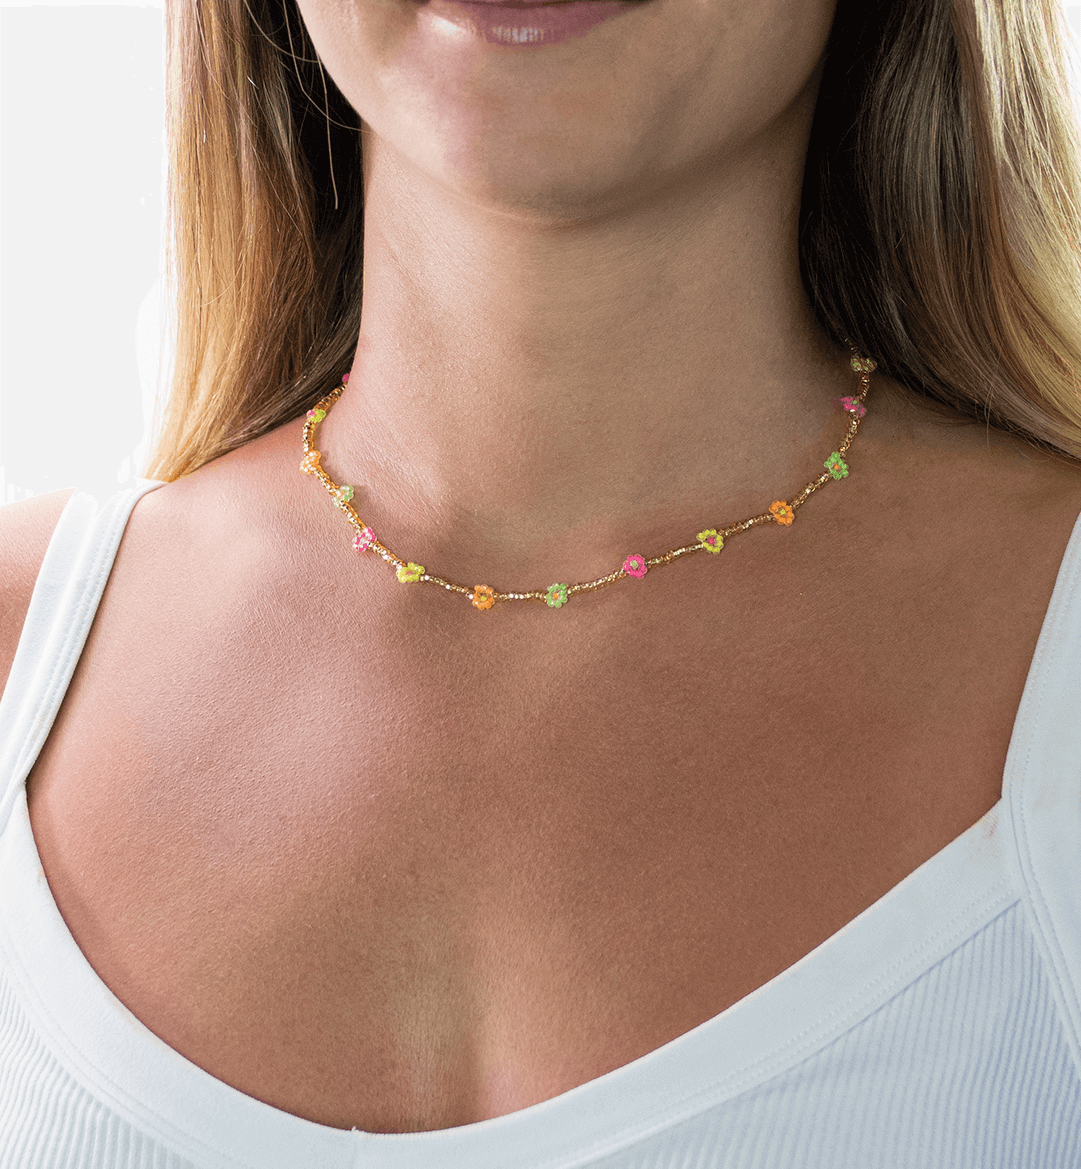 Beaded Daisy Necklace in Gold and Rainbow - Josephine Alexander Collective